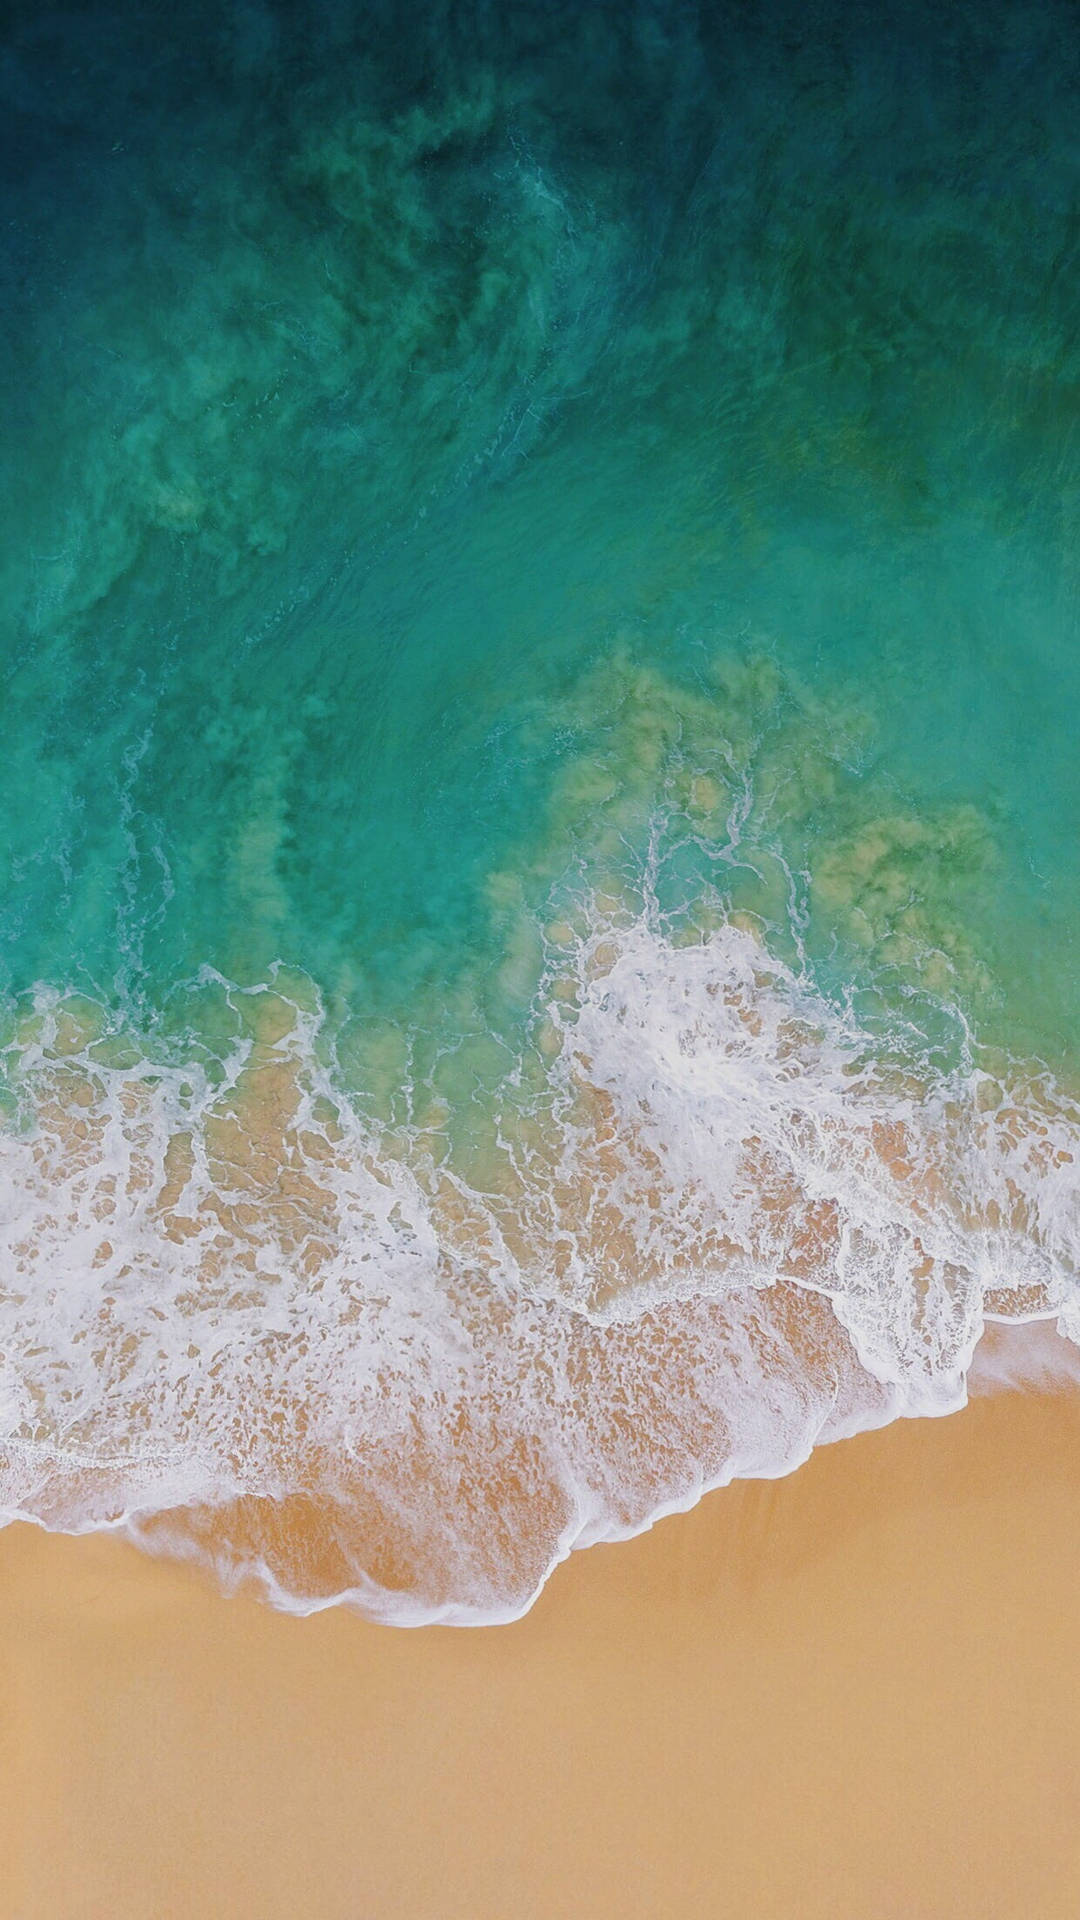 Iphone X Nature View Of Ocean Waves